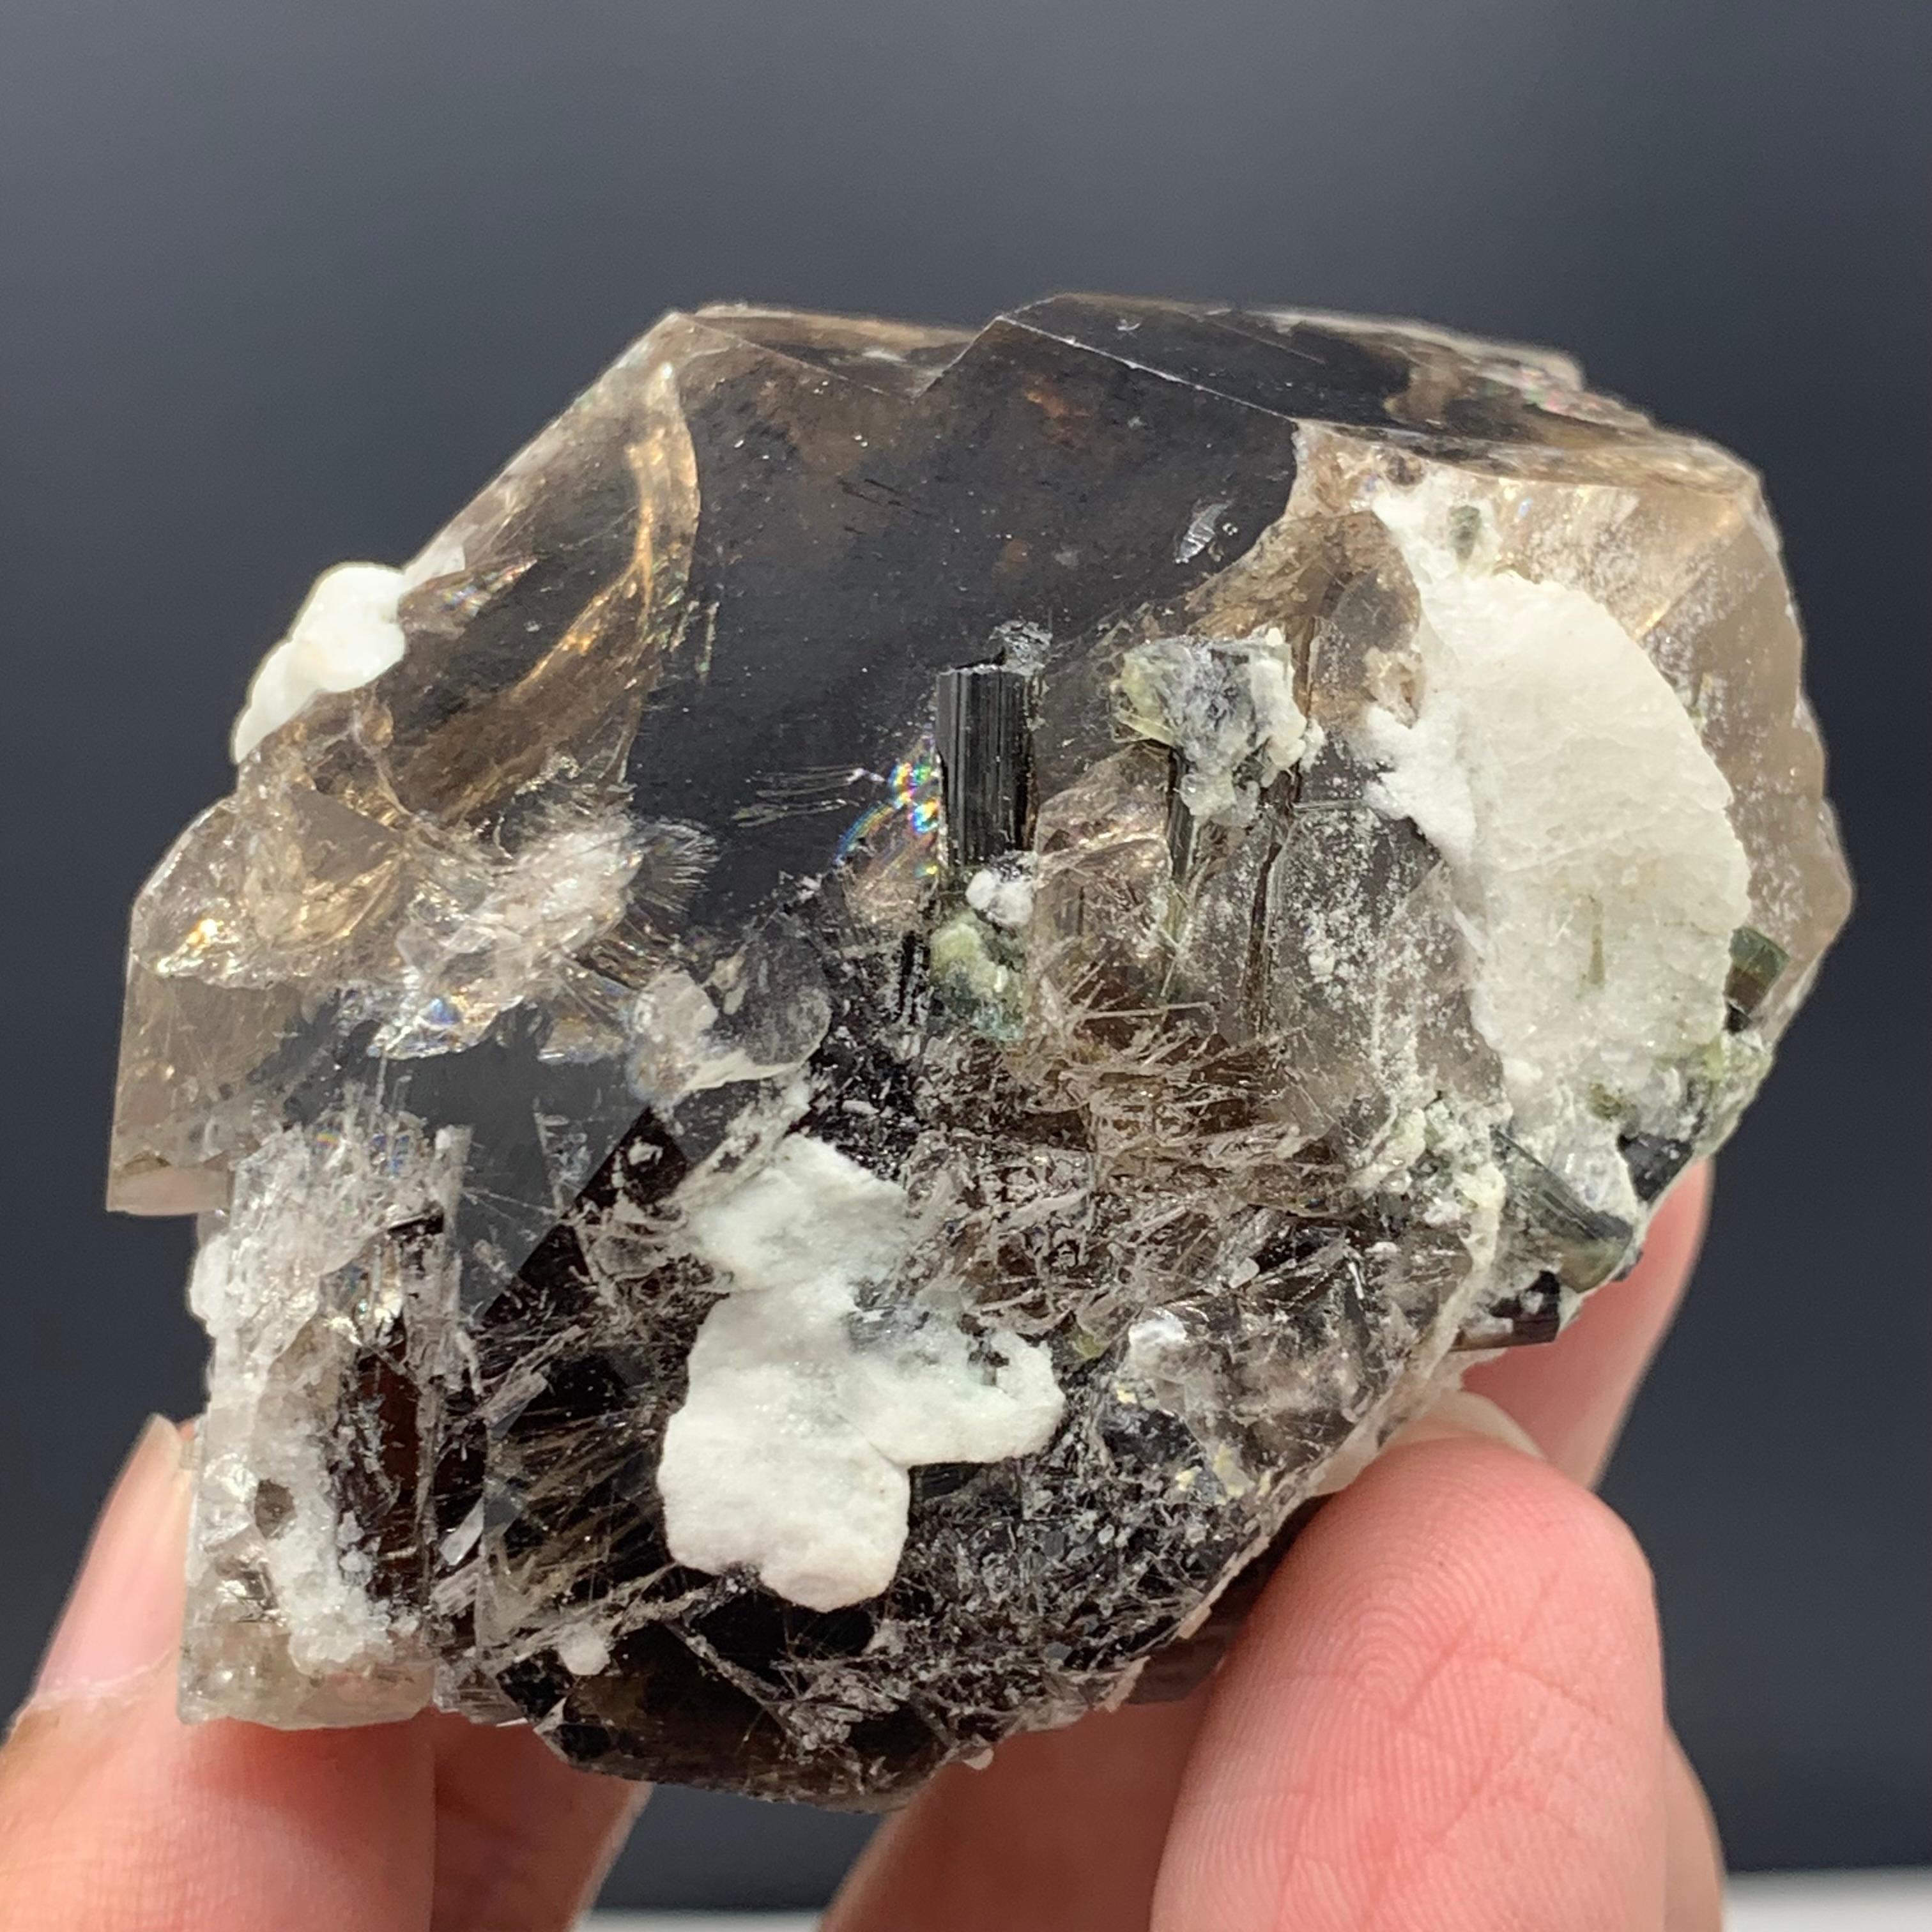 Rock Crystal 124.27 Gram Lovely Smoky Quartz With Tourmaline Crystals From Skardu, Pakistan  For Sale